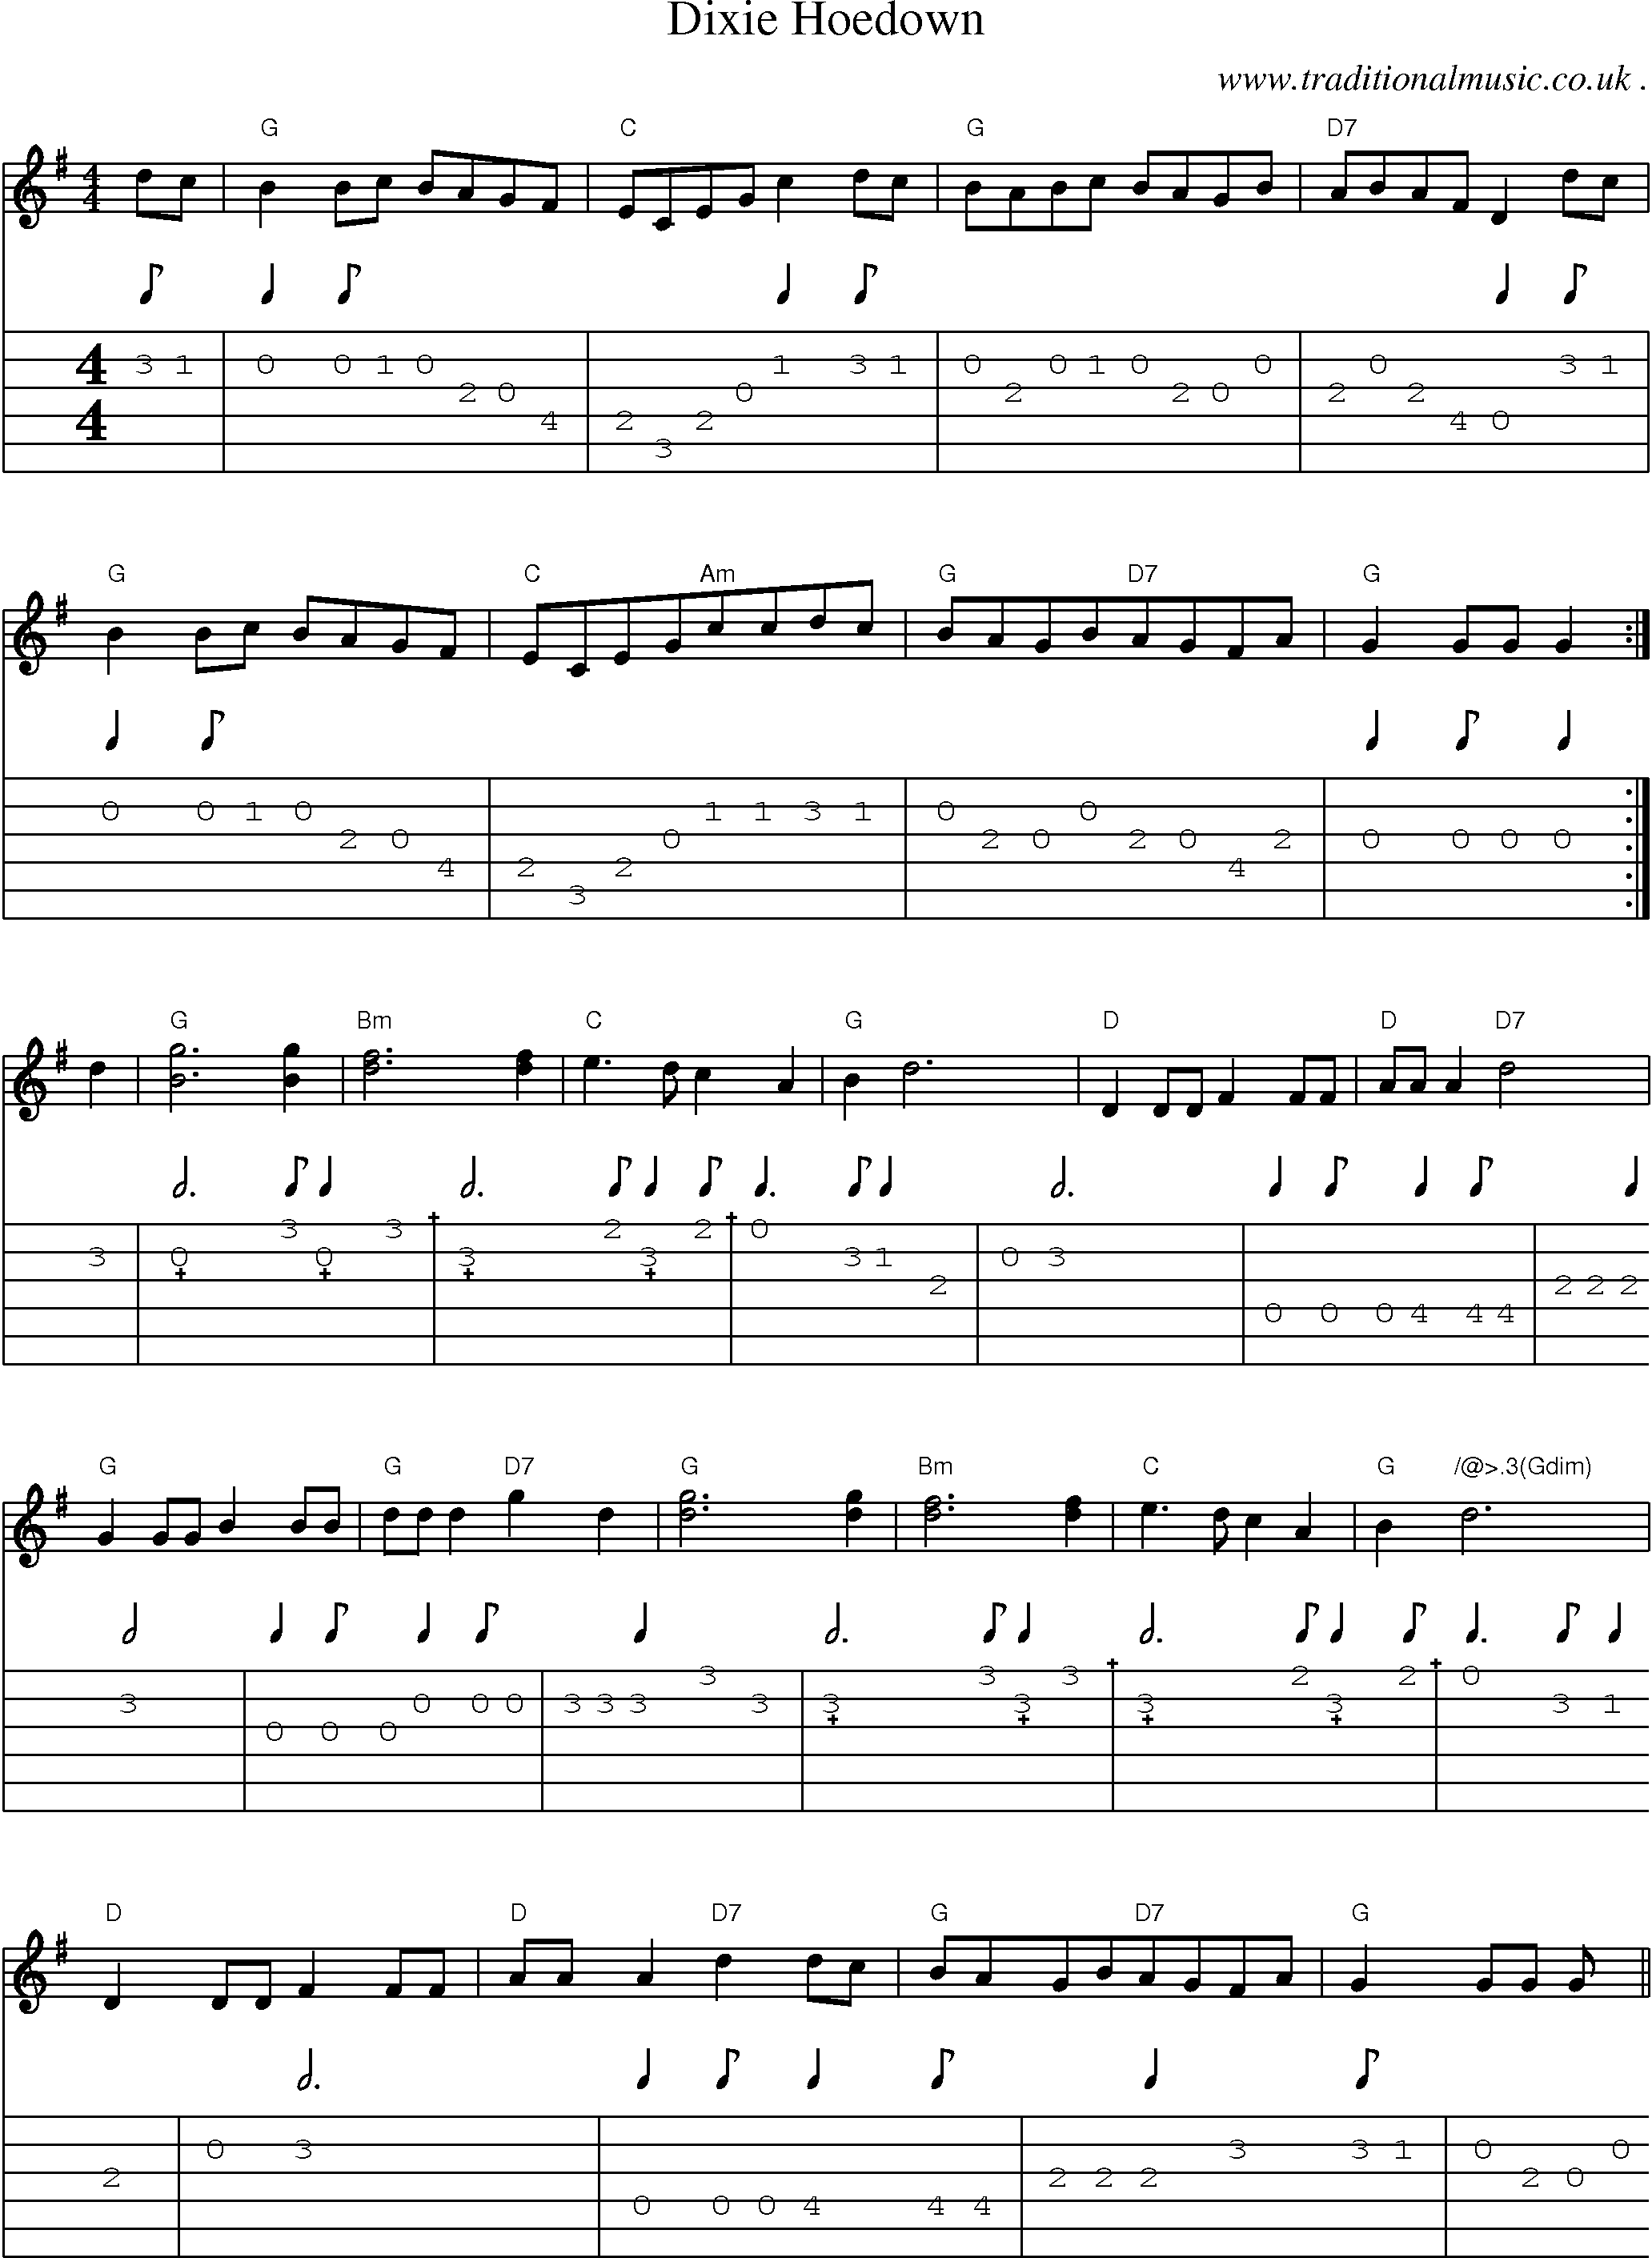 Sheet-Music and Guitar Tabs for Dixie Hoedown